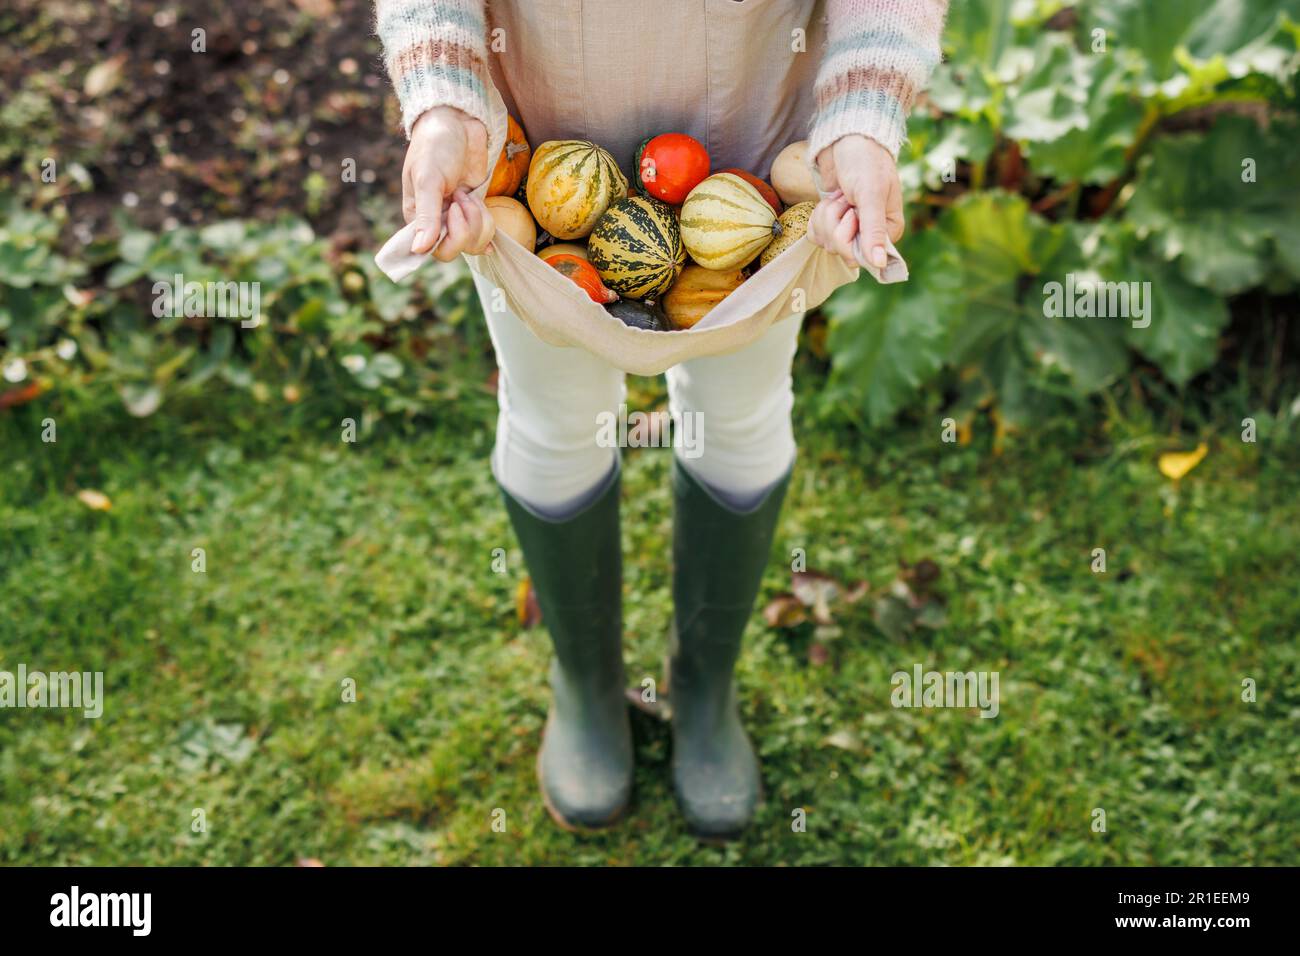 Farmer with rubber boots holding harvested decorative pumpkins in apron at autumn garden Stock Photo